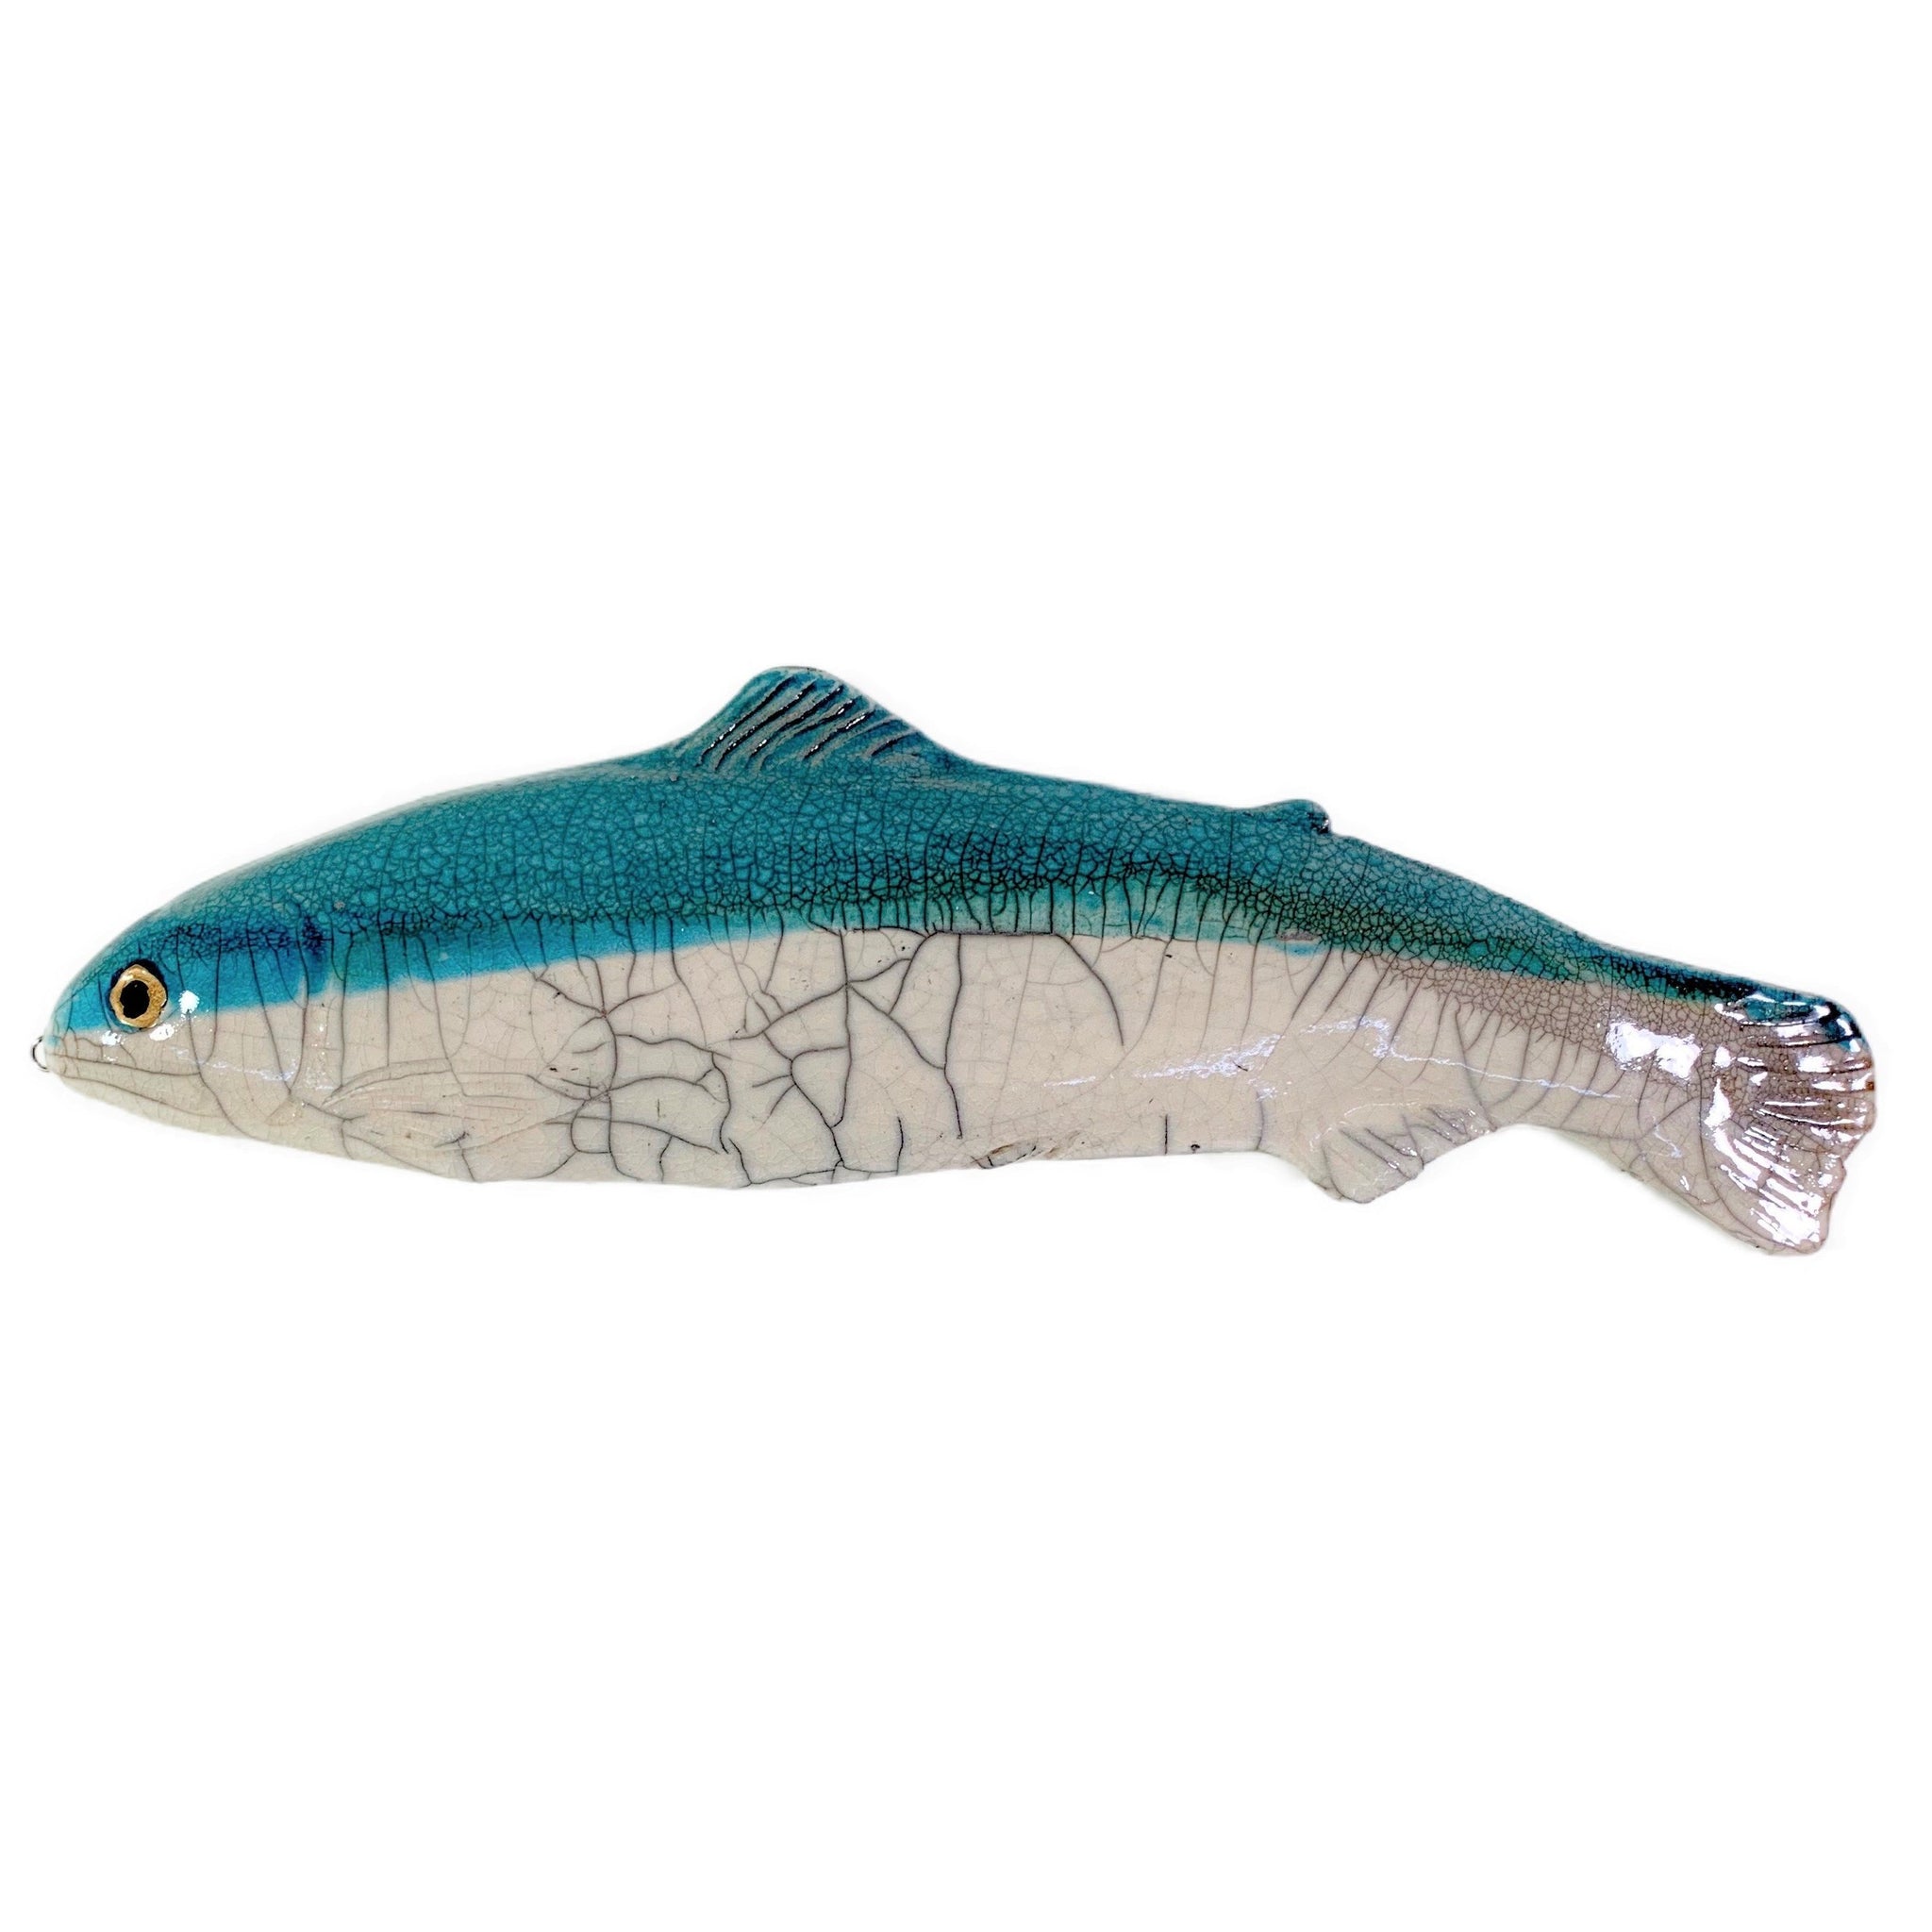 Trout Fish in Turquoise